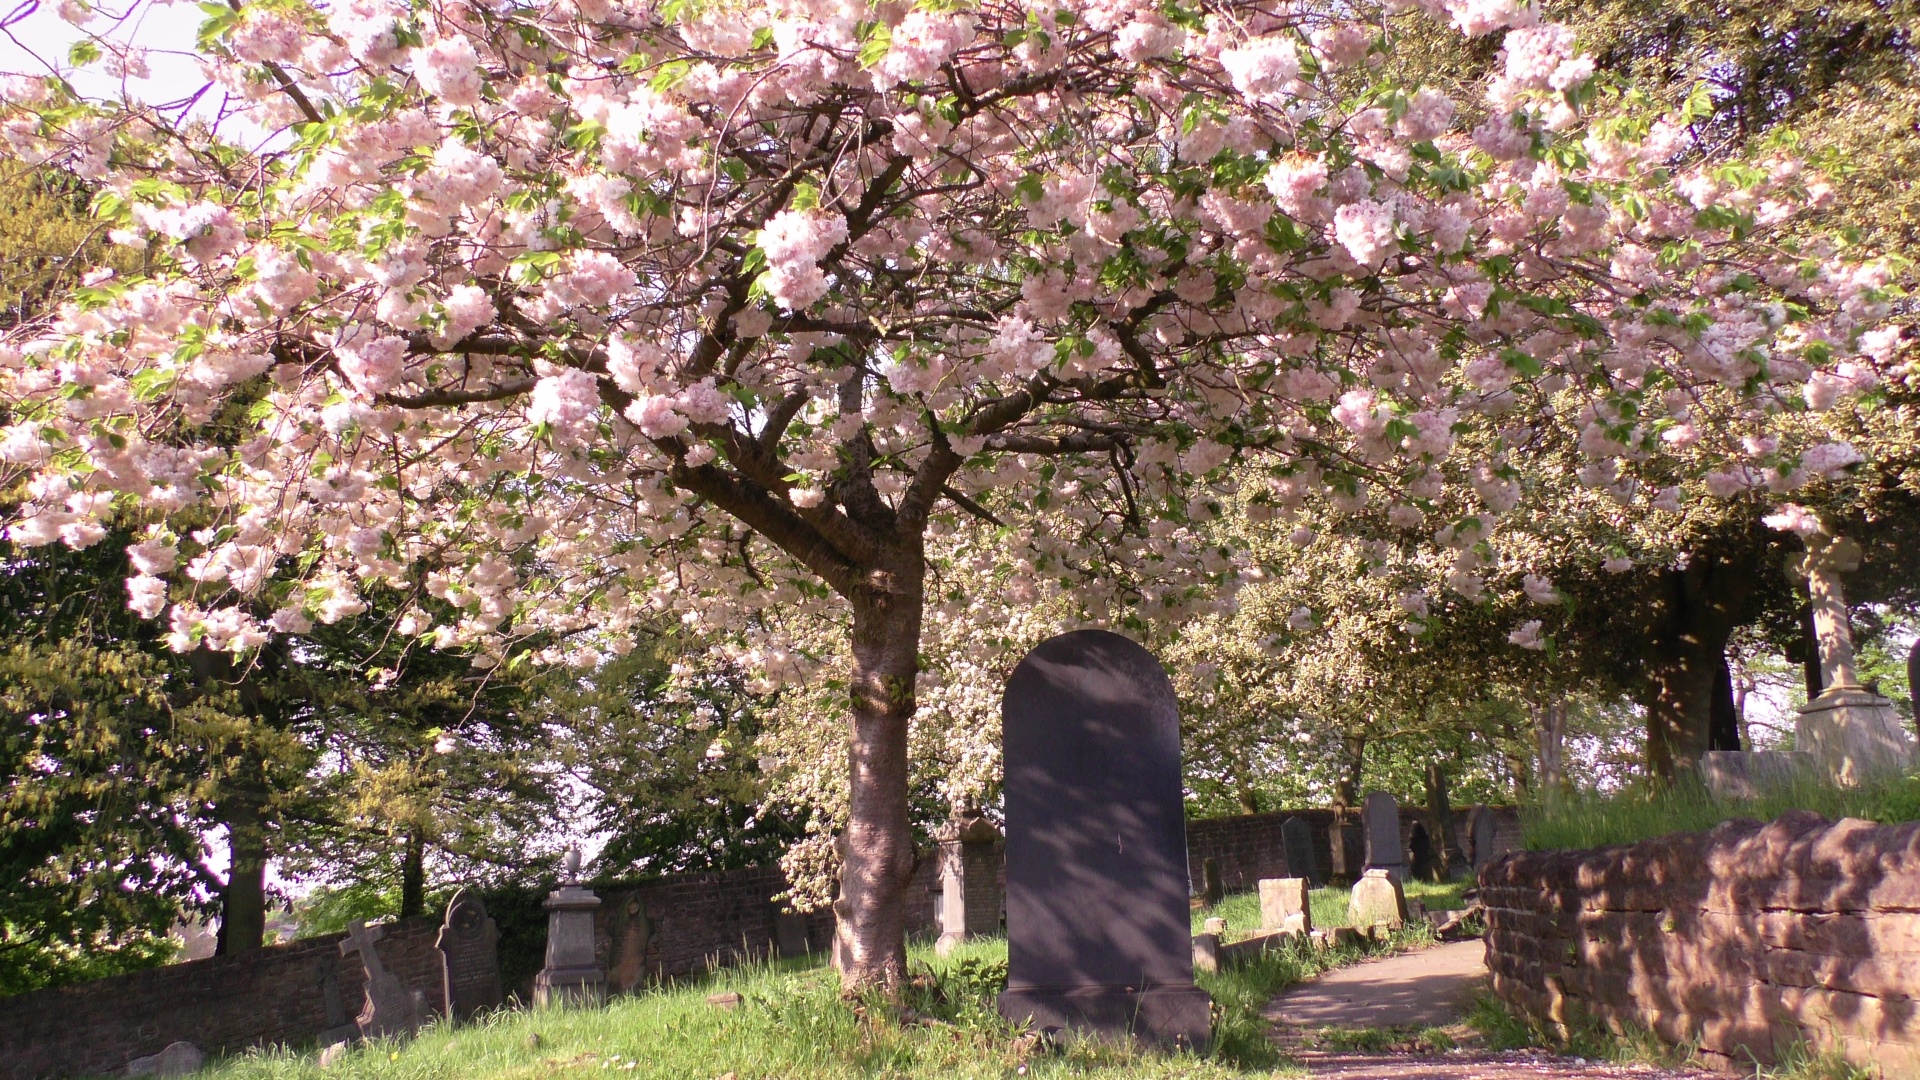 Cherry blossom tree in a Cemetery, Nottingham, England.